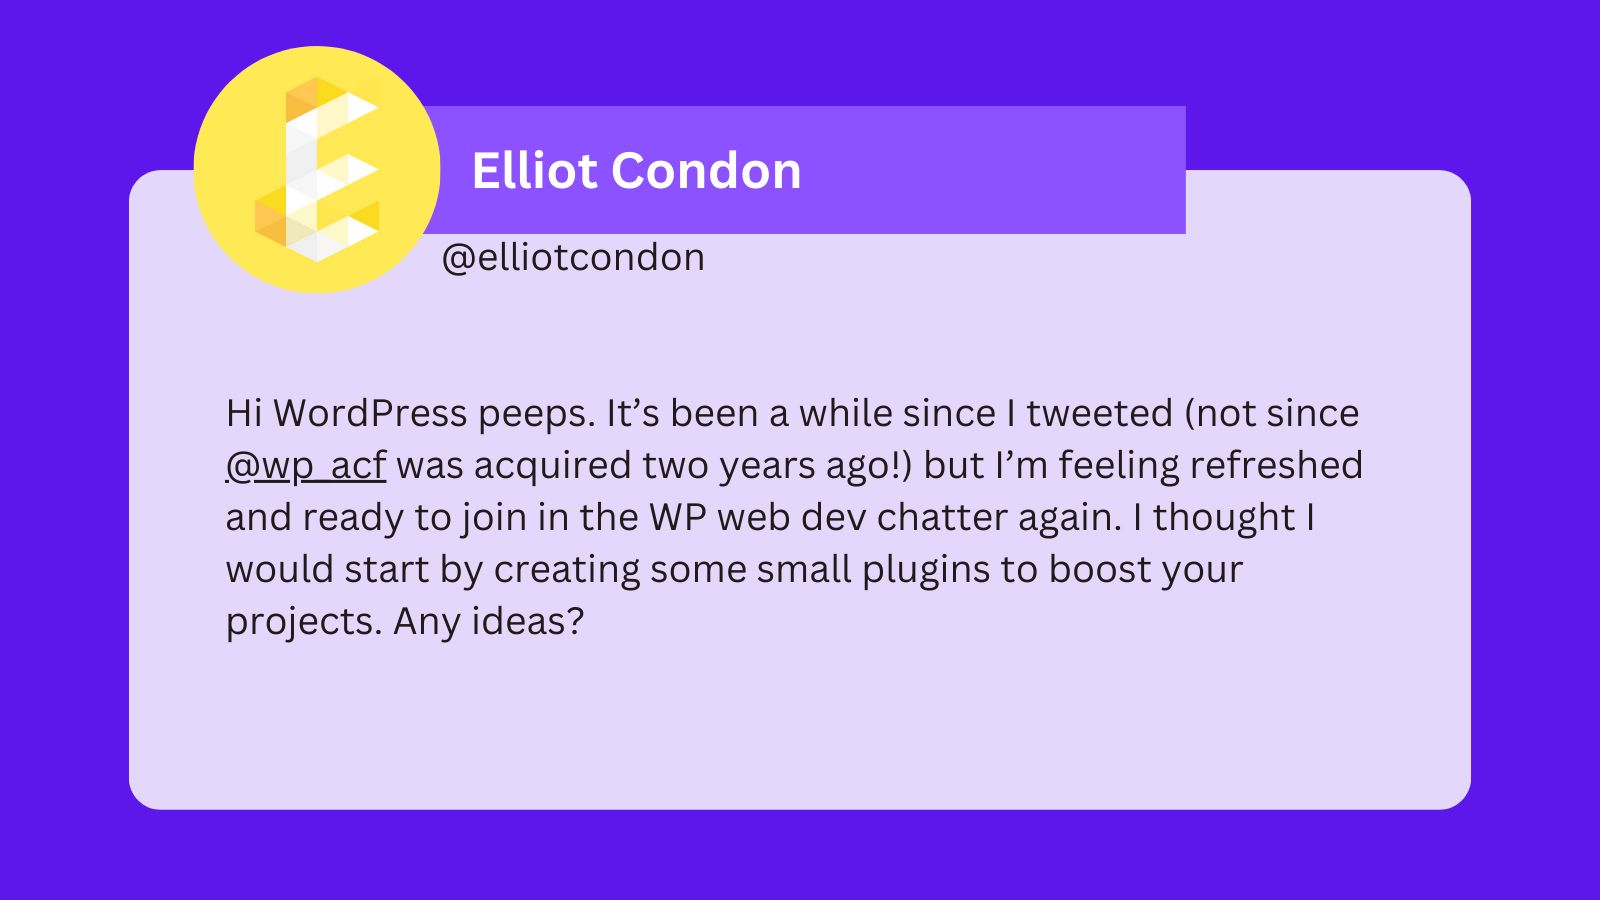 A tweet that reads: Hi WordPress peeps. It's been a while since I tweeted (not since @wp_acf) was acquired two years ago!) but I'm feeling refreshed and ready to join the WP web dev chatter again. I thought I would start by creating some small plugins to boost your projects. Any ideas?